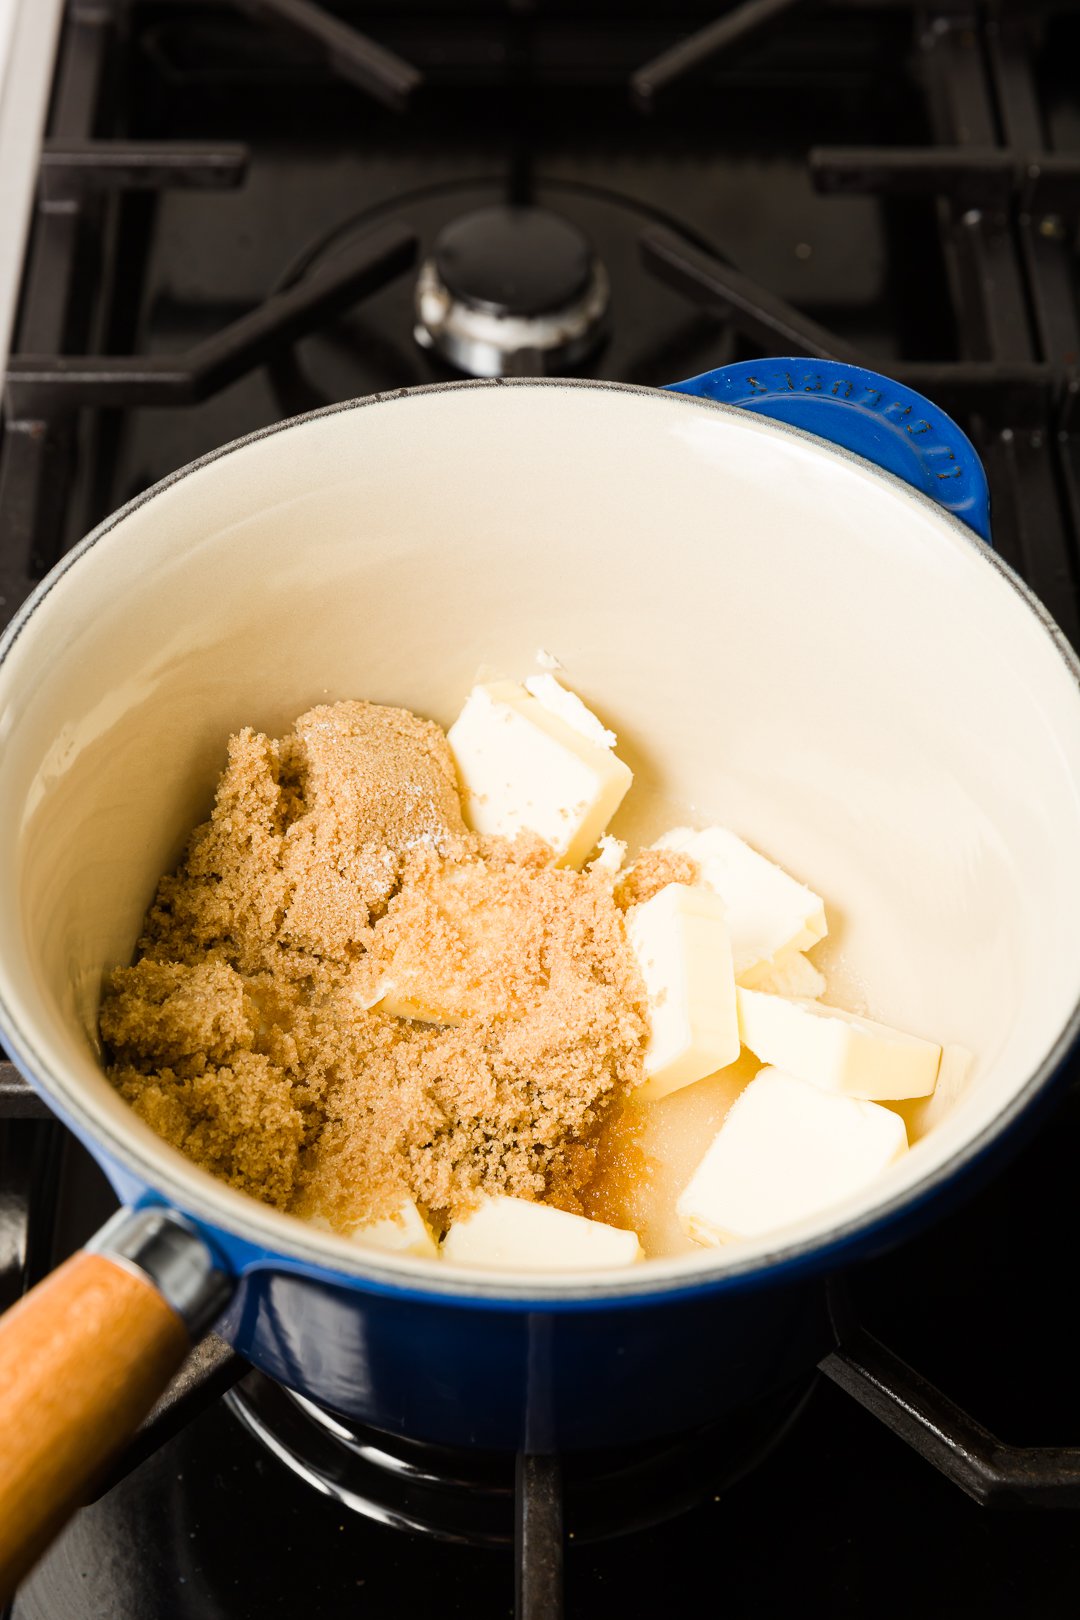 Caramel ingredients in a small blue pot on a stove